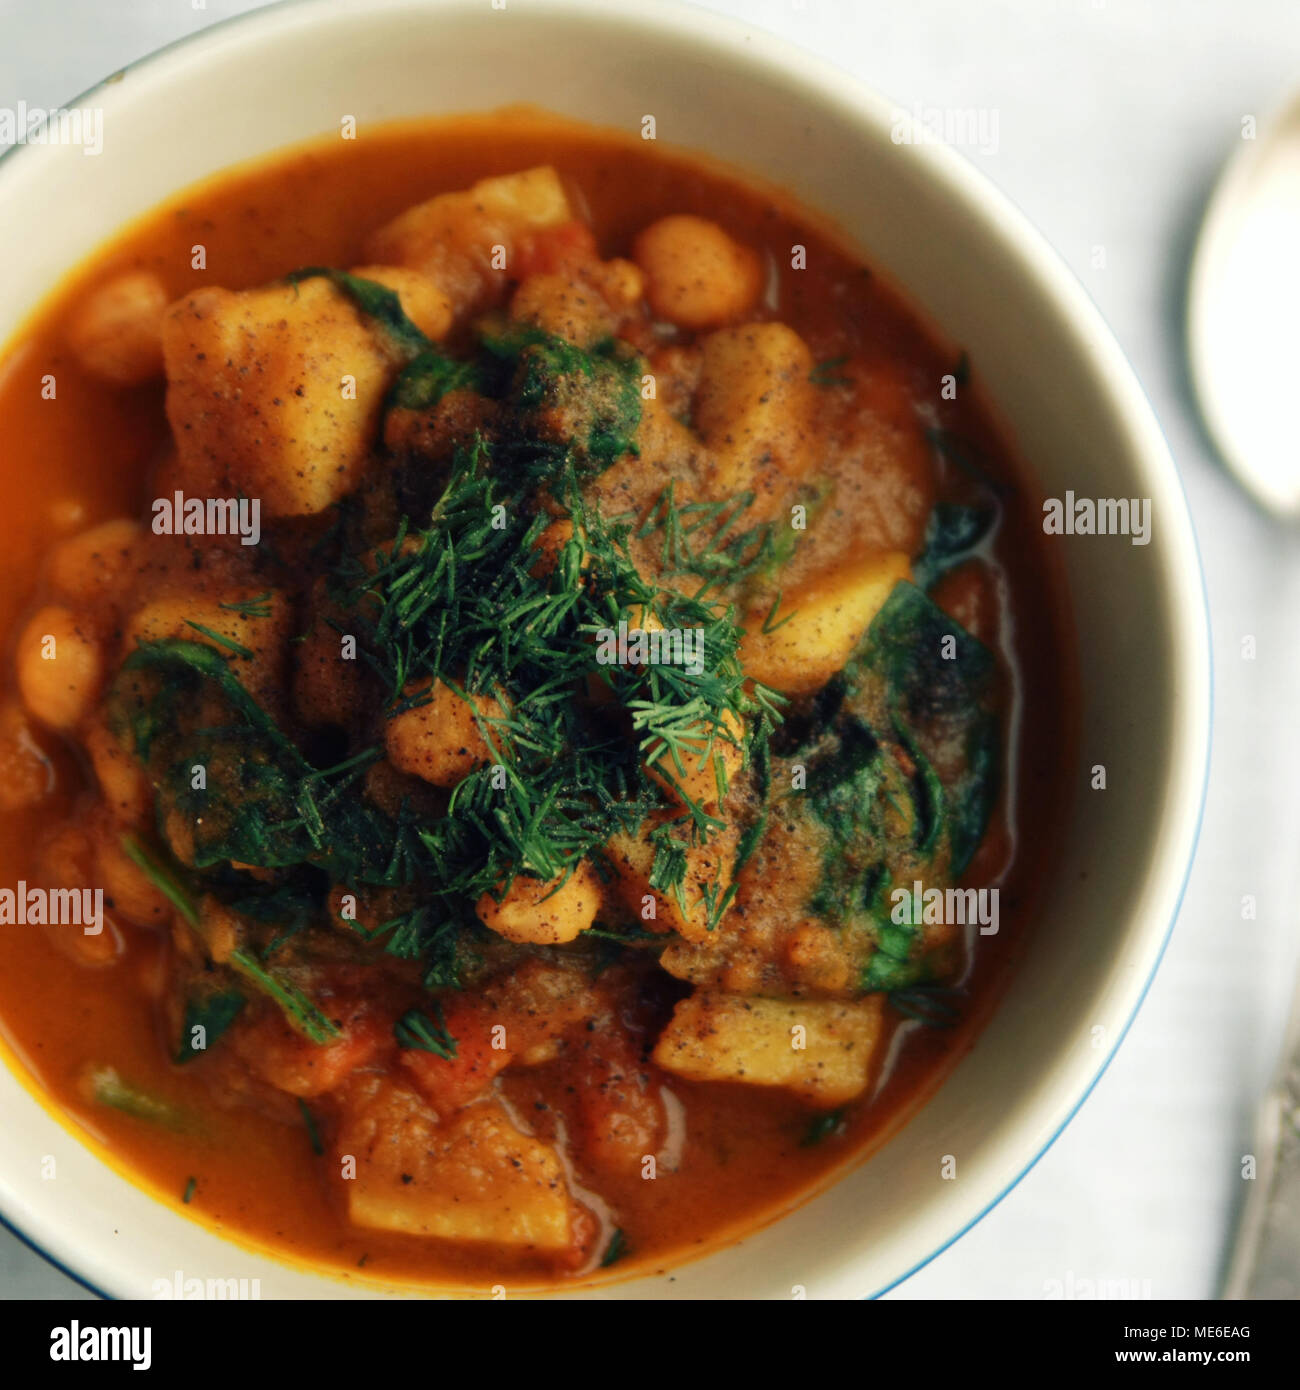 Simple vegetable soup. European cuisine. Chickpeas, potato and carrot. Organic food. Vegan dish. Vegetarian lunch. Top view. Toned photo. Stock Photo